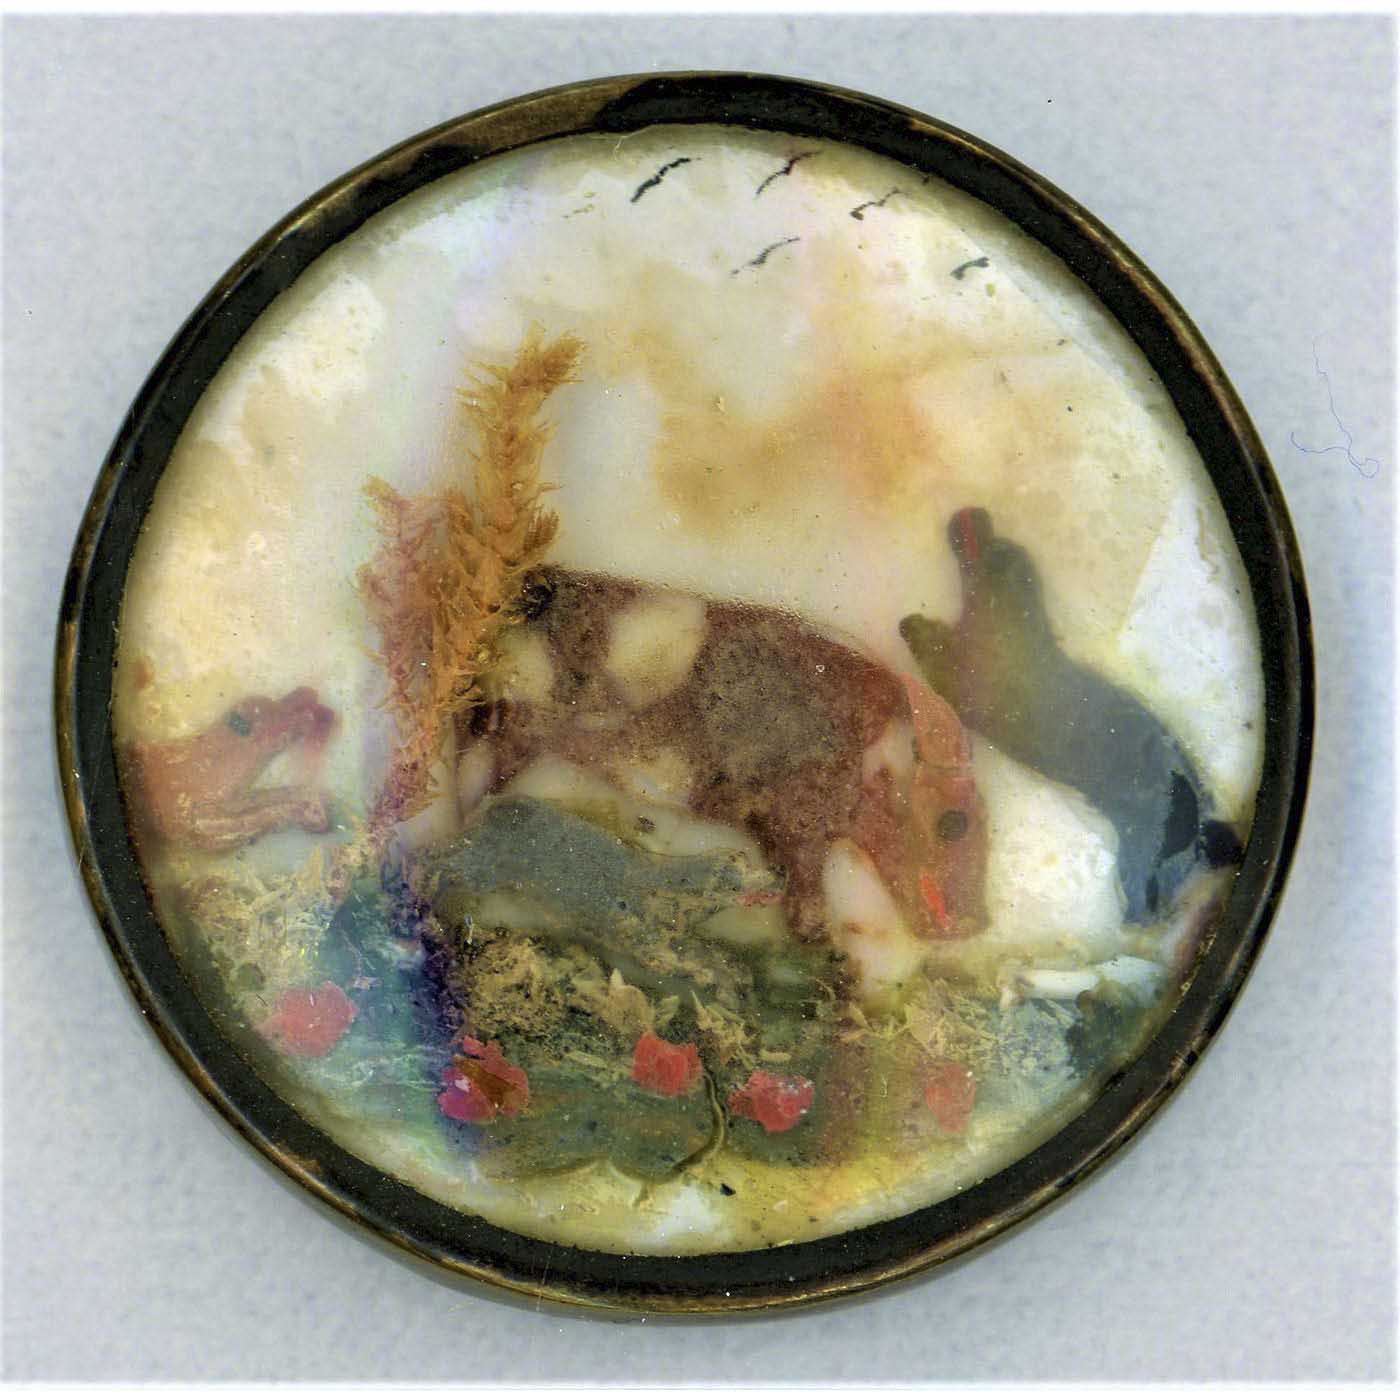 A photo of an antique and vintage button.